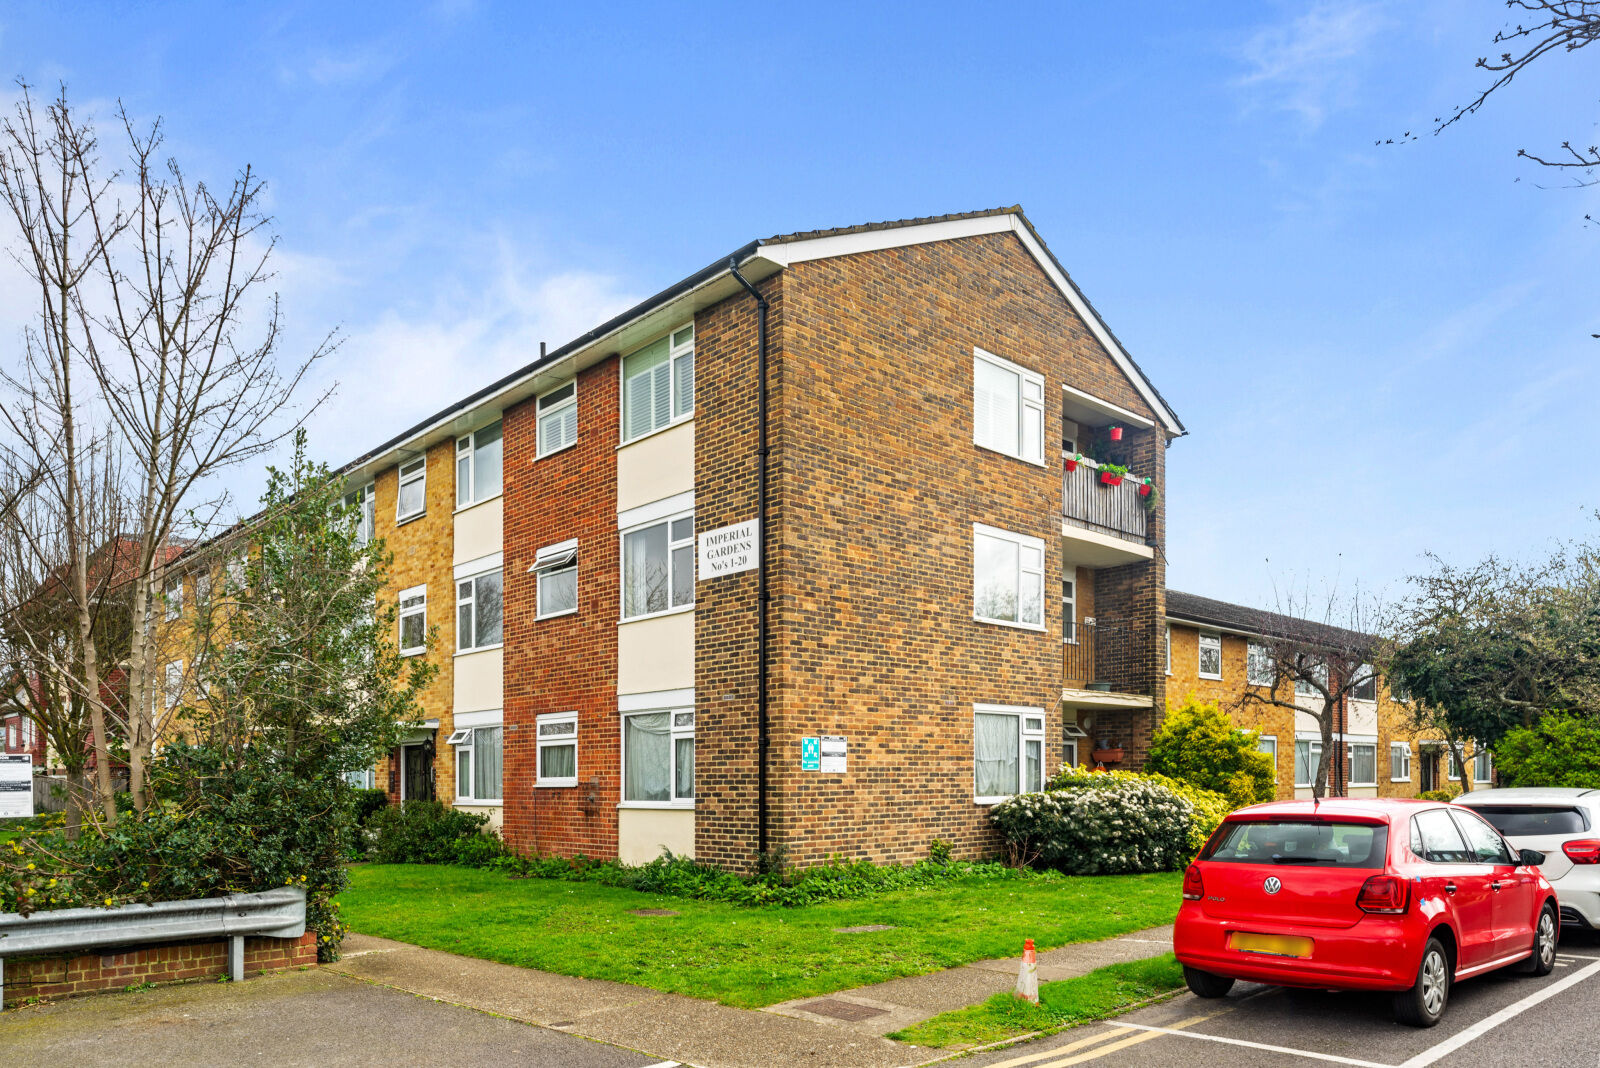 2 bedroom  flat for sale Imperial Gardens, Mitcham, CR4, main image